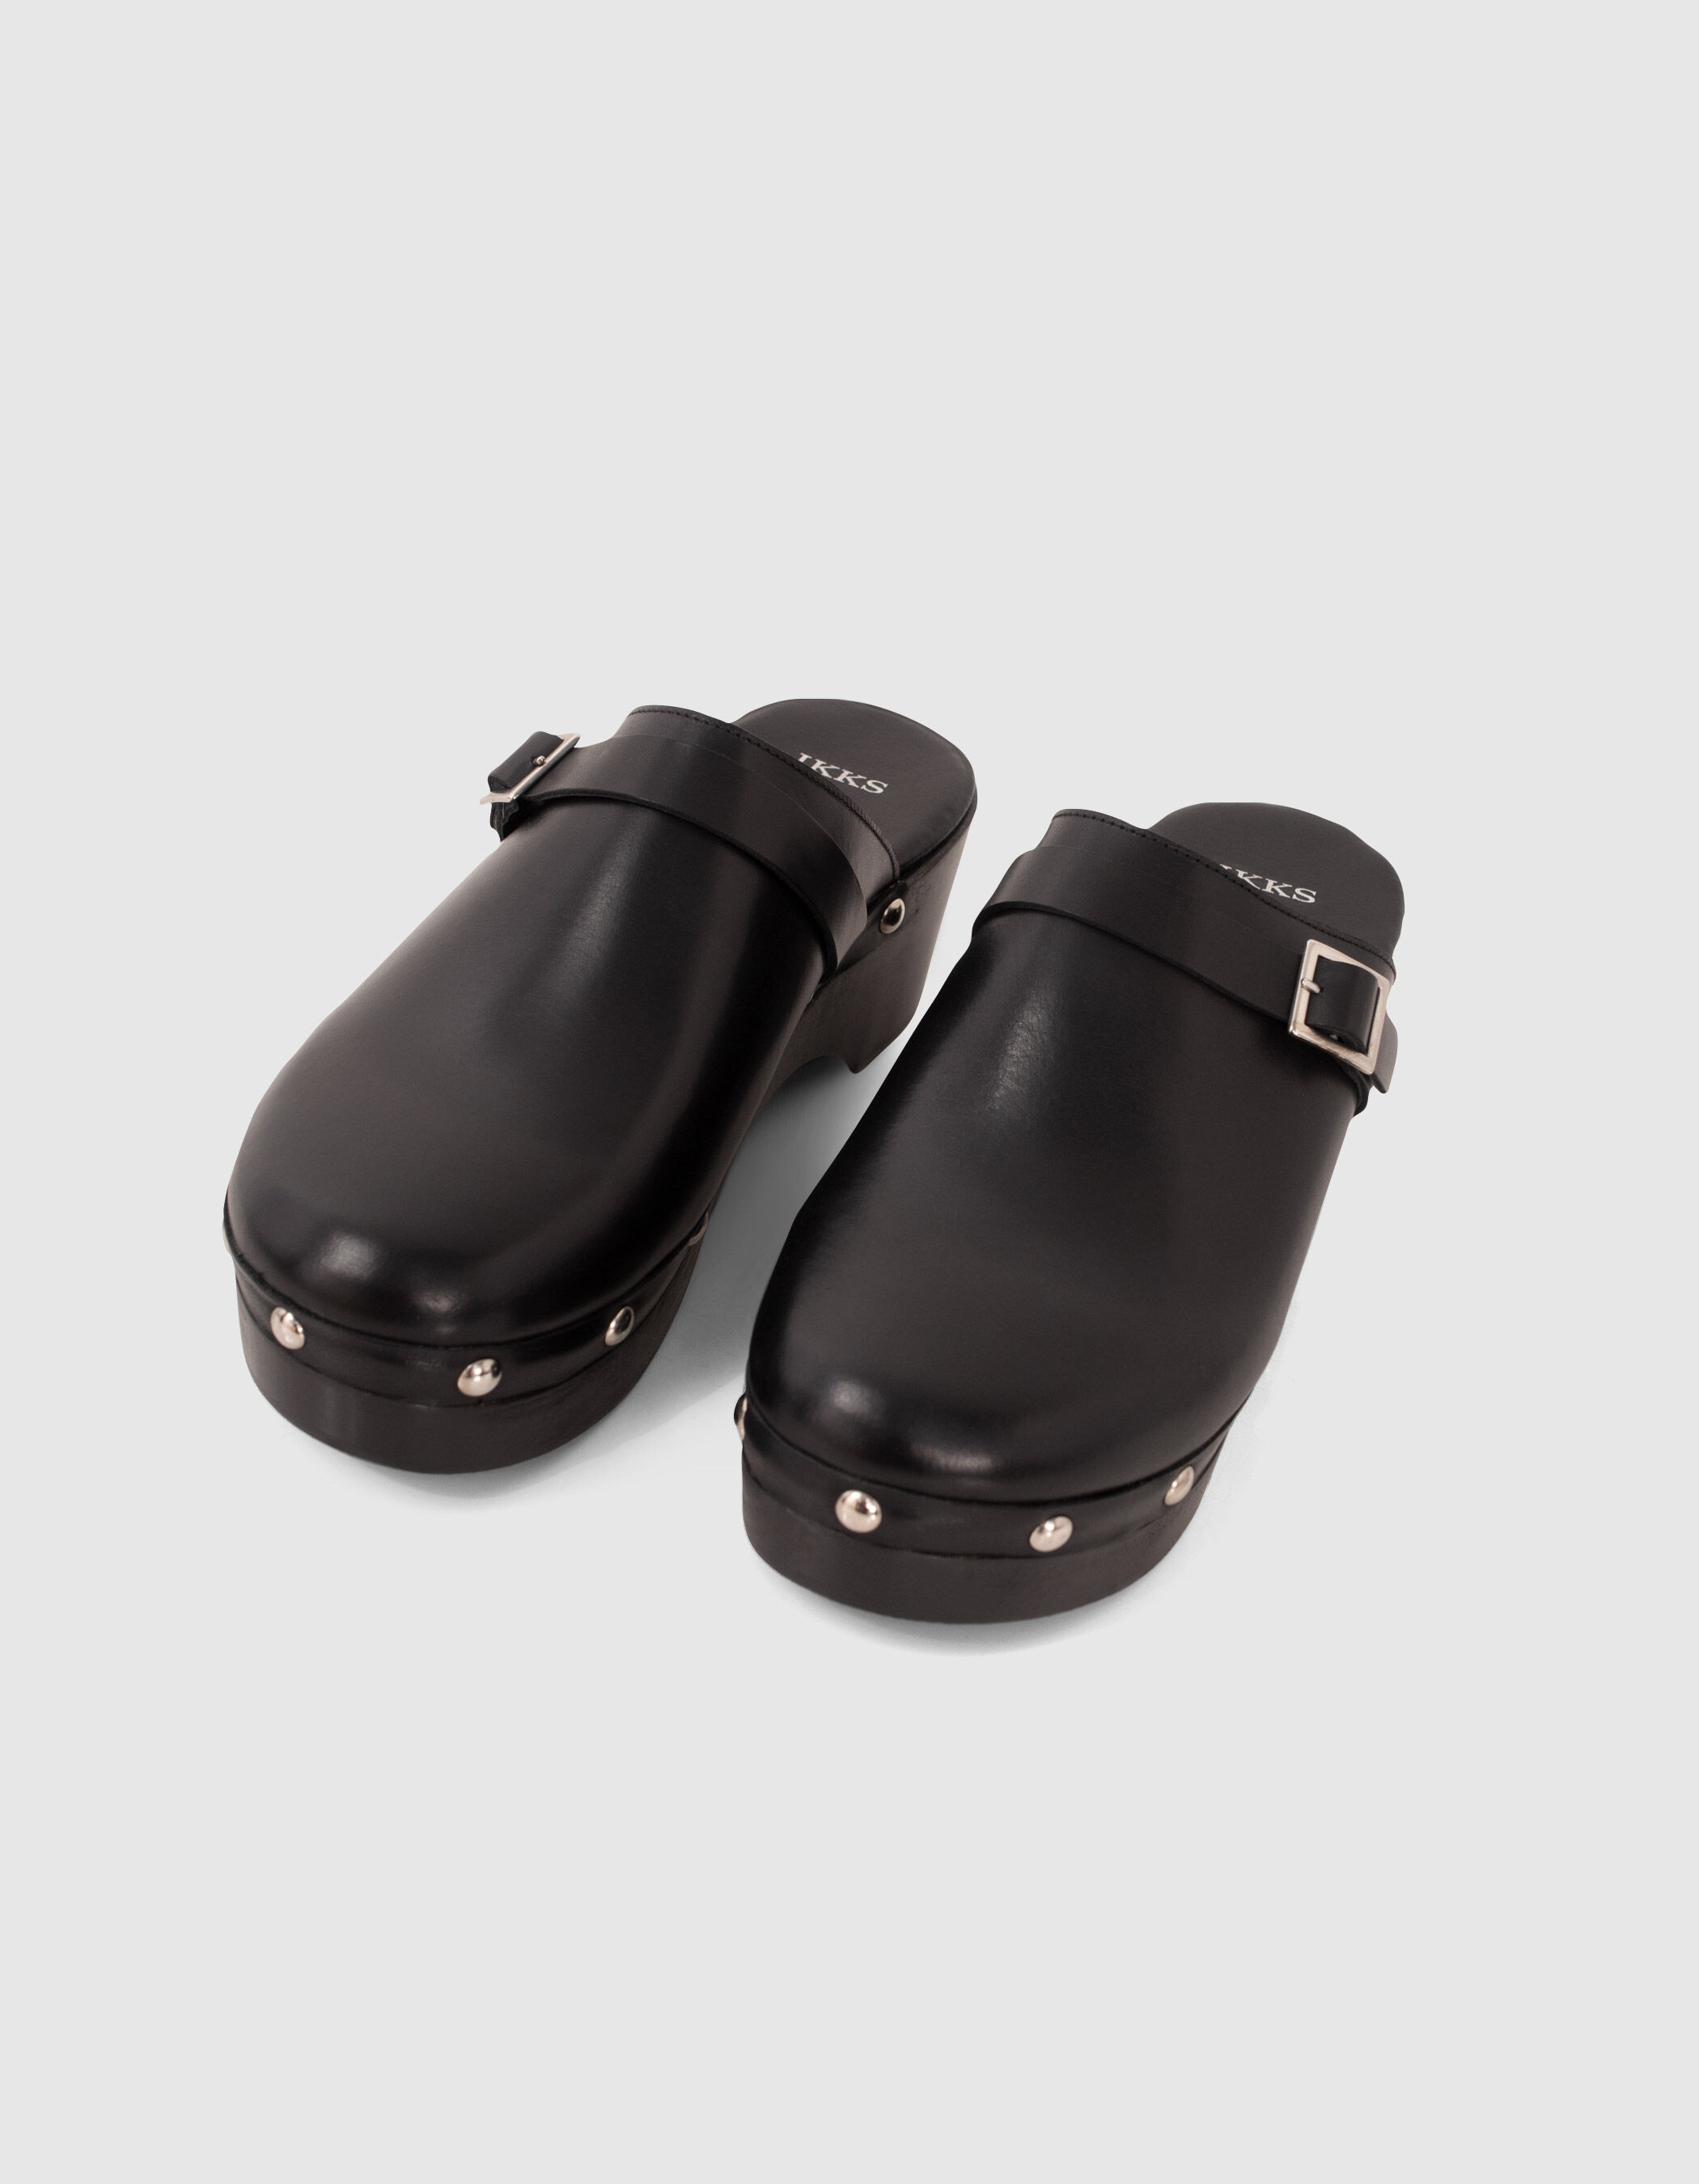 Women's black studded leather clogs with wooden heel